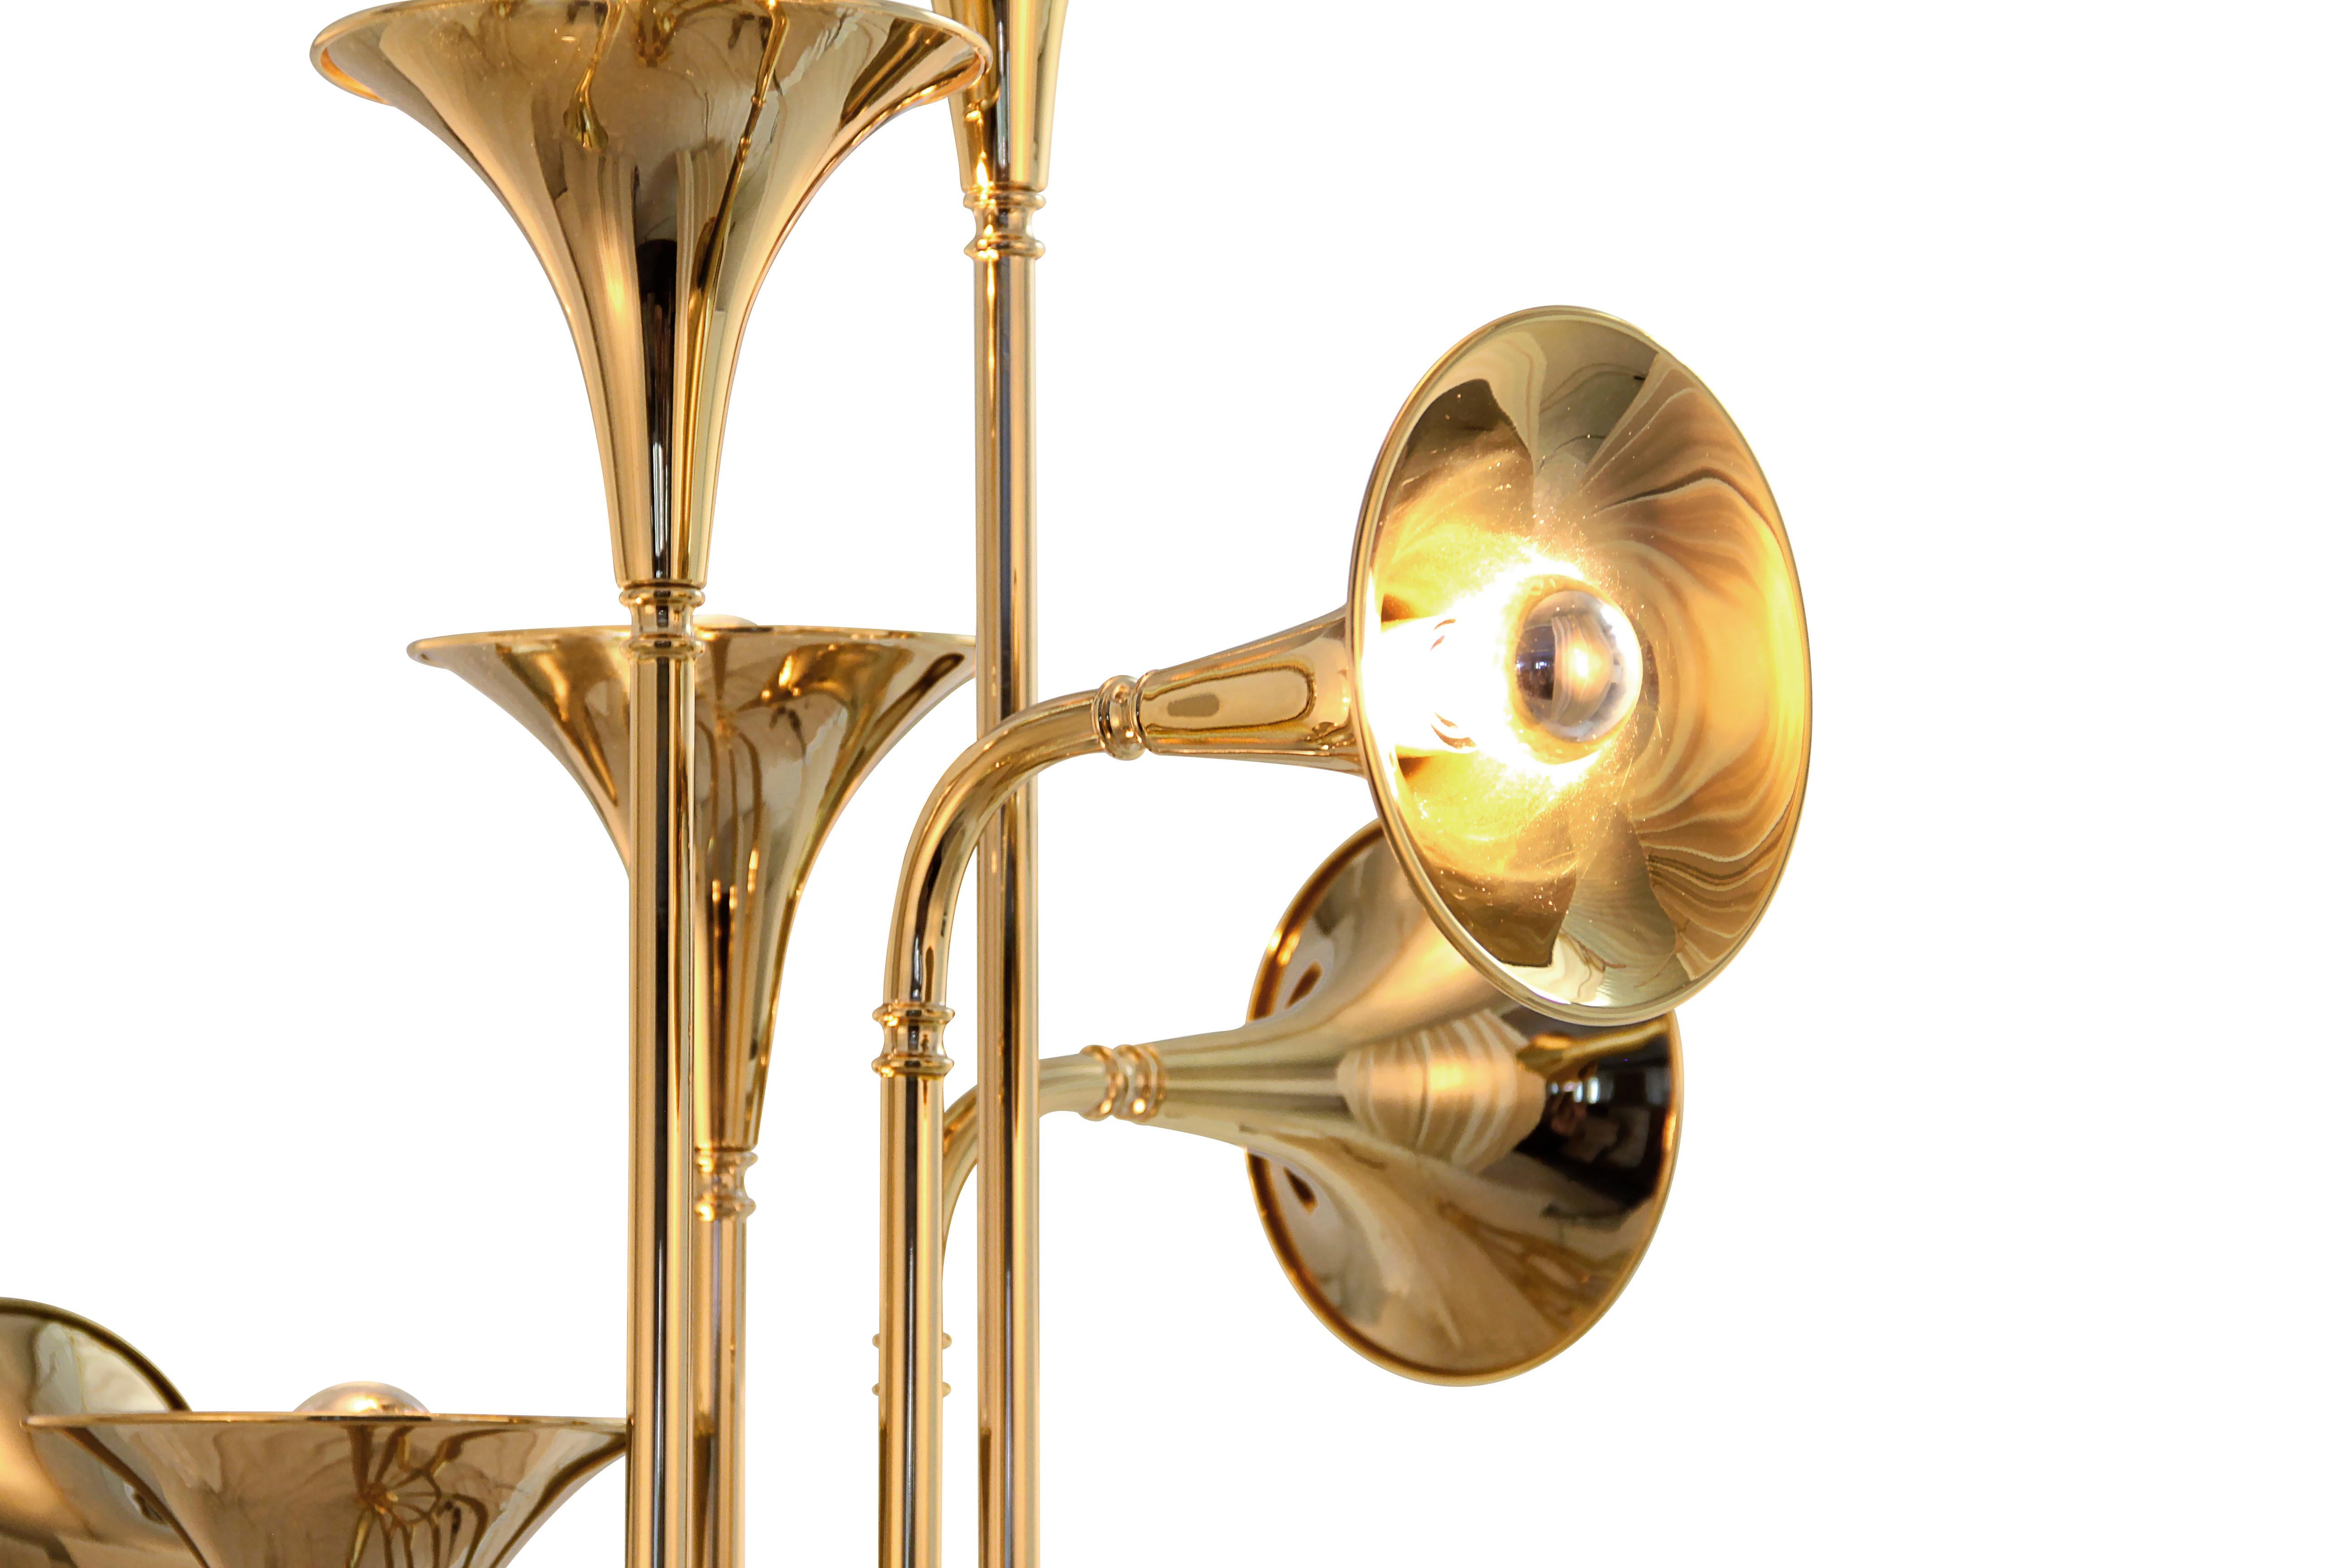 Botti floor lamp was inspired by the jazz musician of Chris Botti. The mid-century floor lamp is handmade in brass with a gold plated finish that reminds of a real trumpet due to its unique shape. With an aluminum base, this modern floor light can